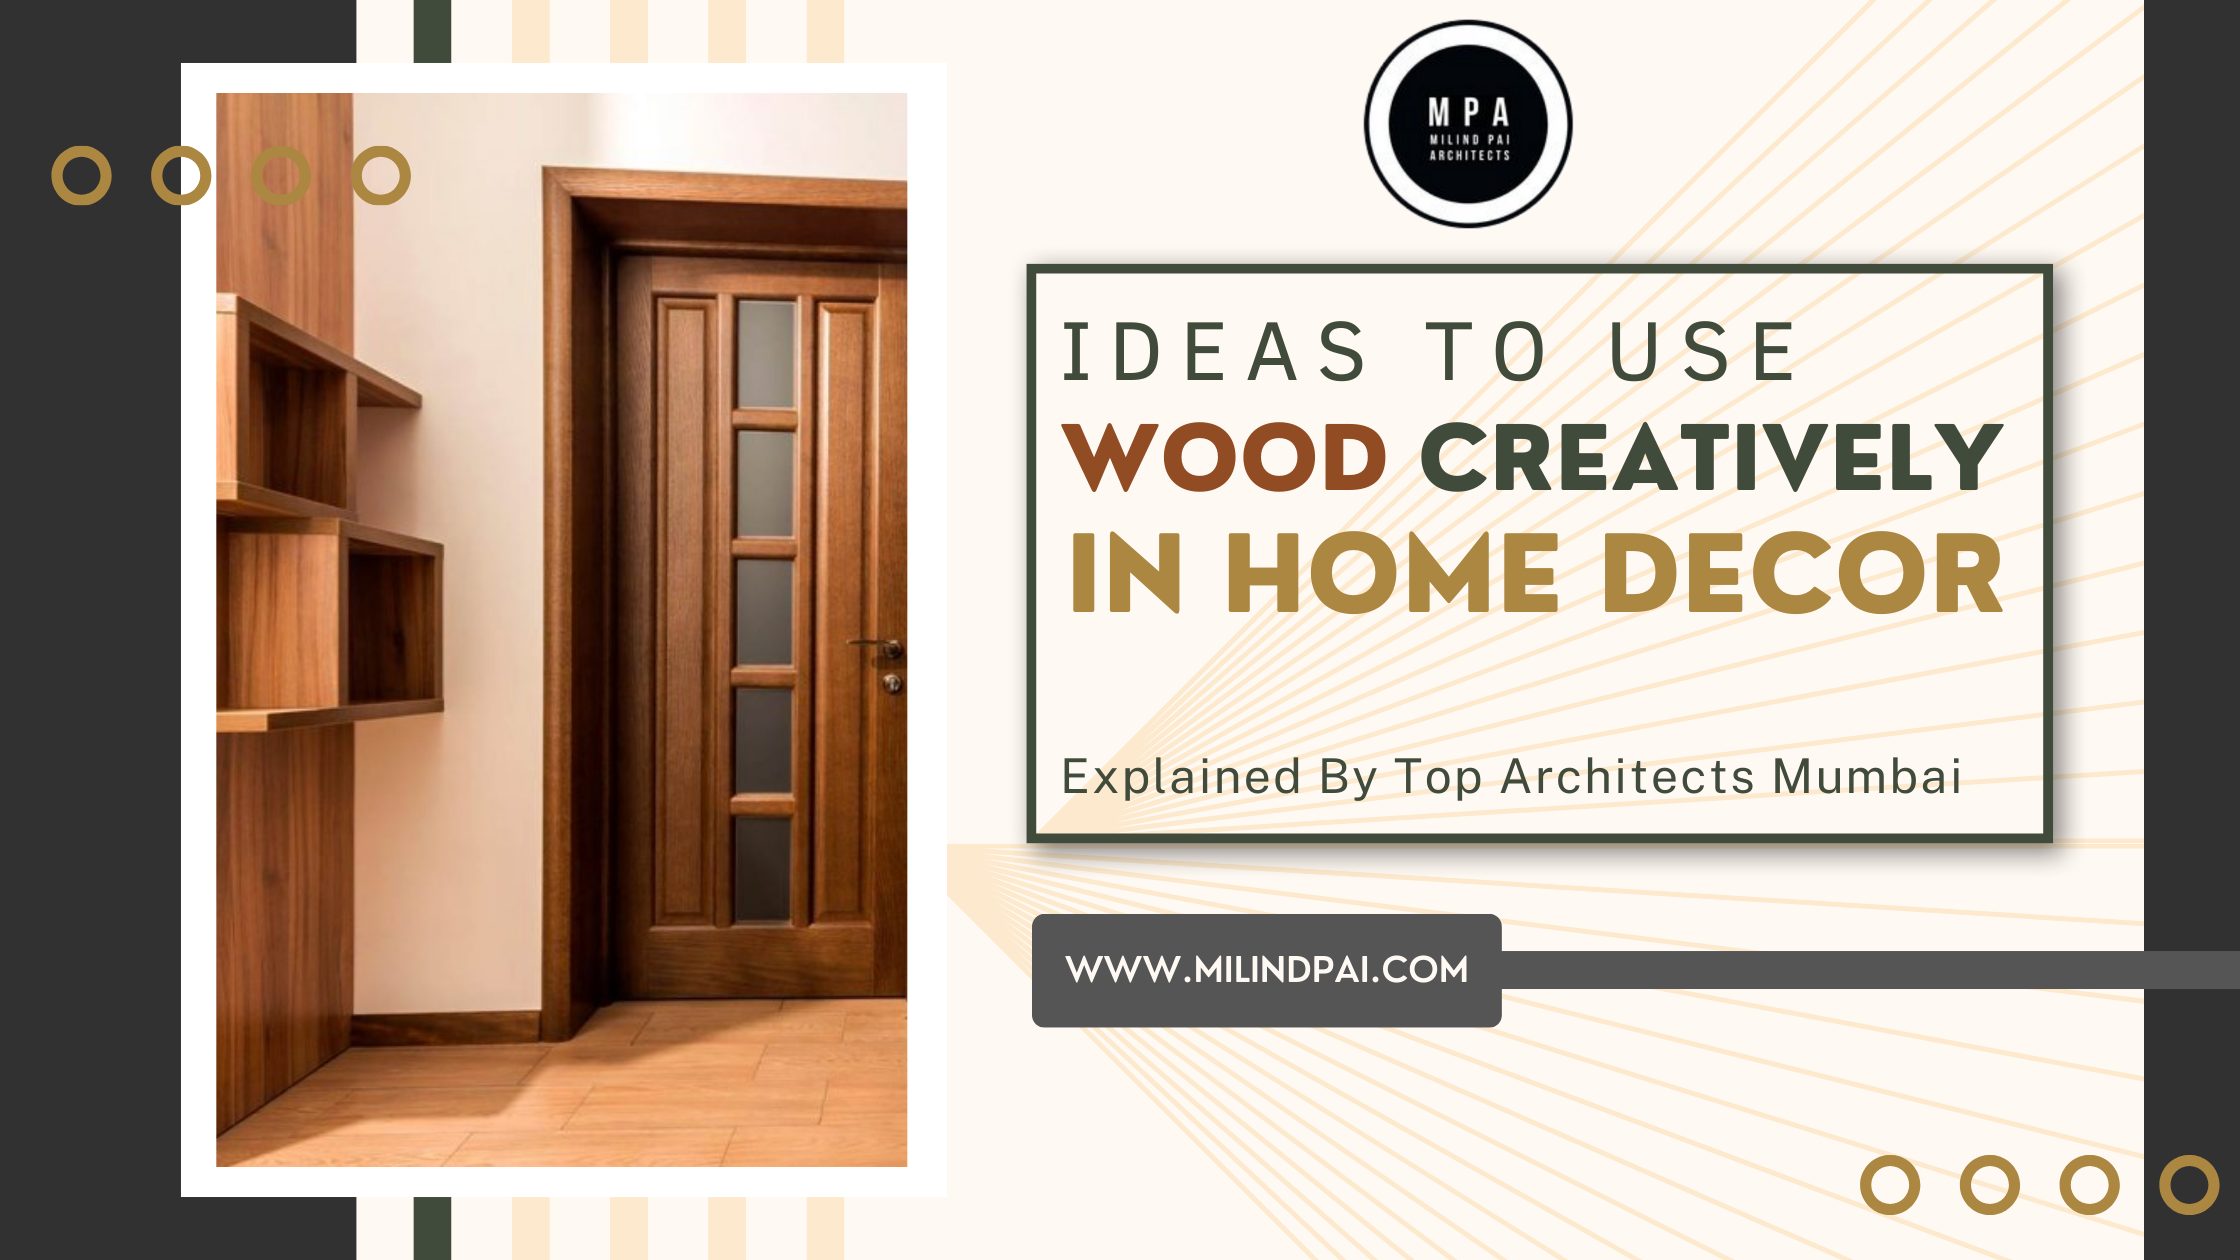 Ideas to use Wood creatively in Home Decor Explained By Top Architects Mumbai